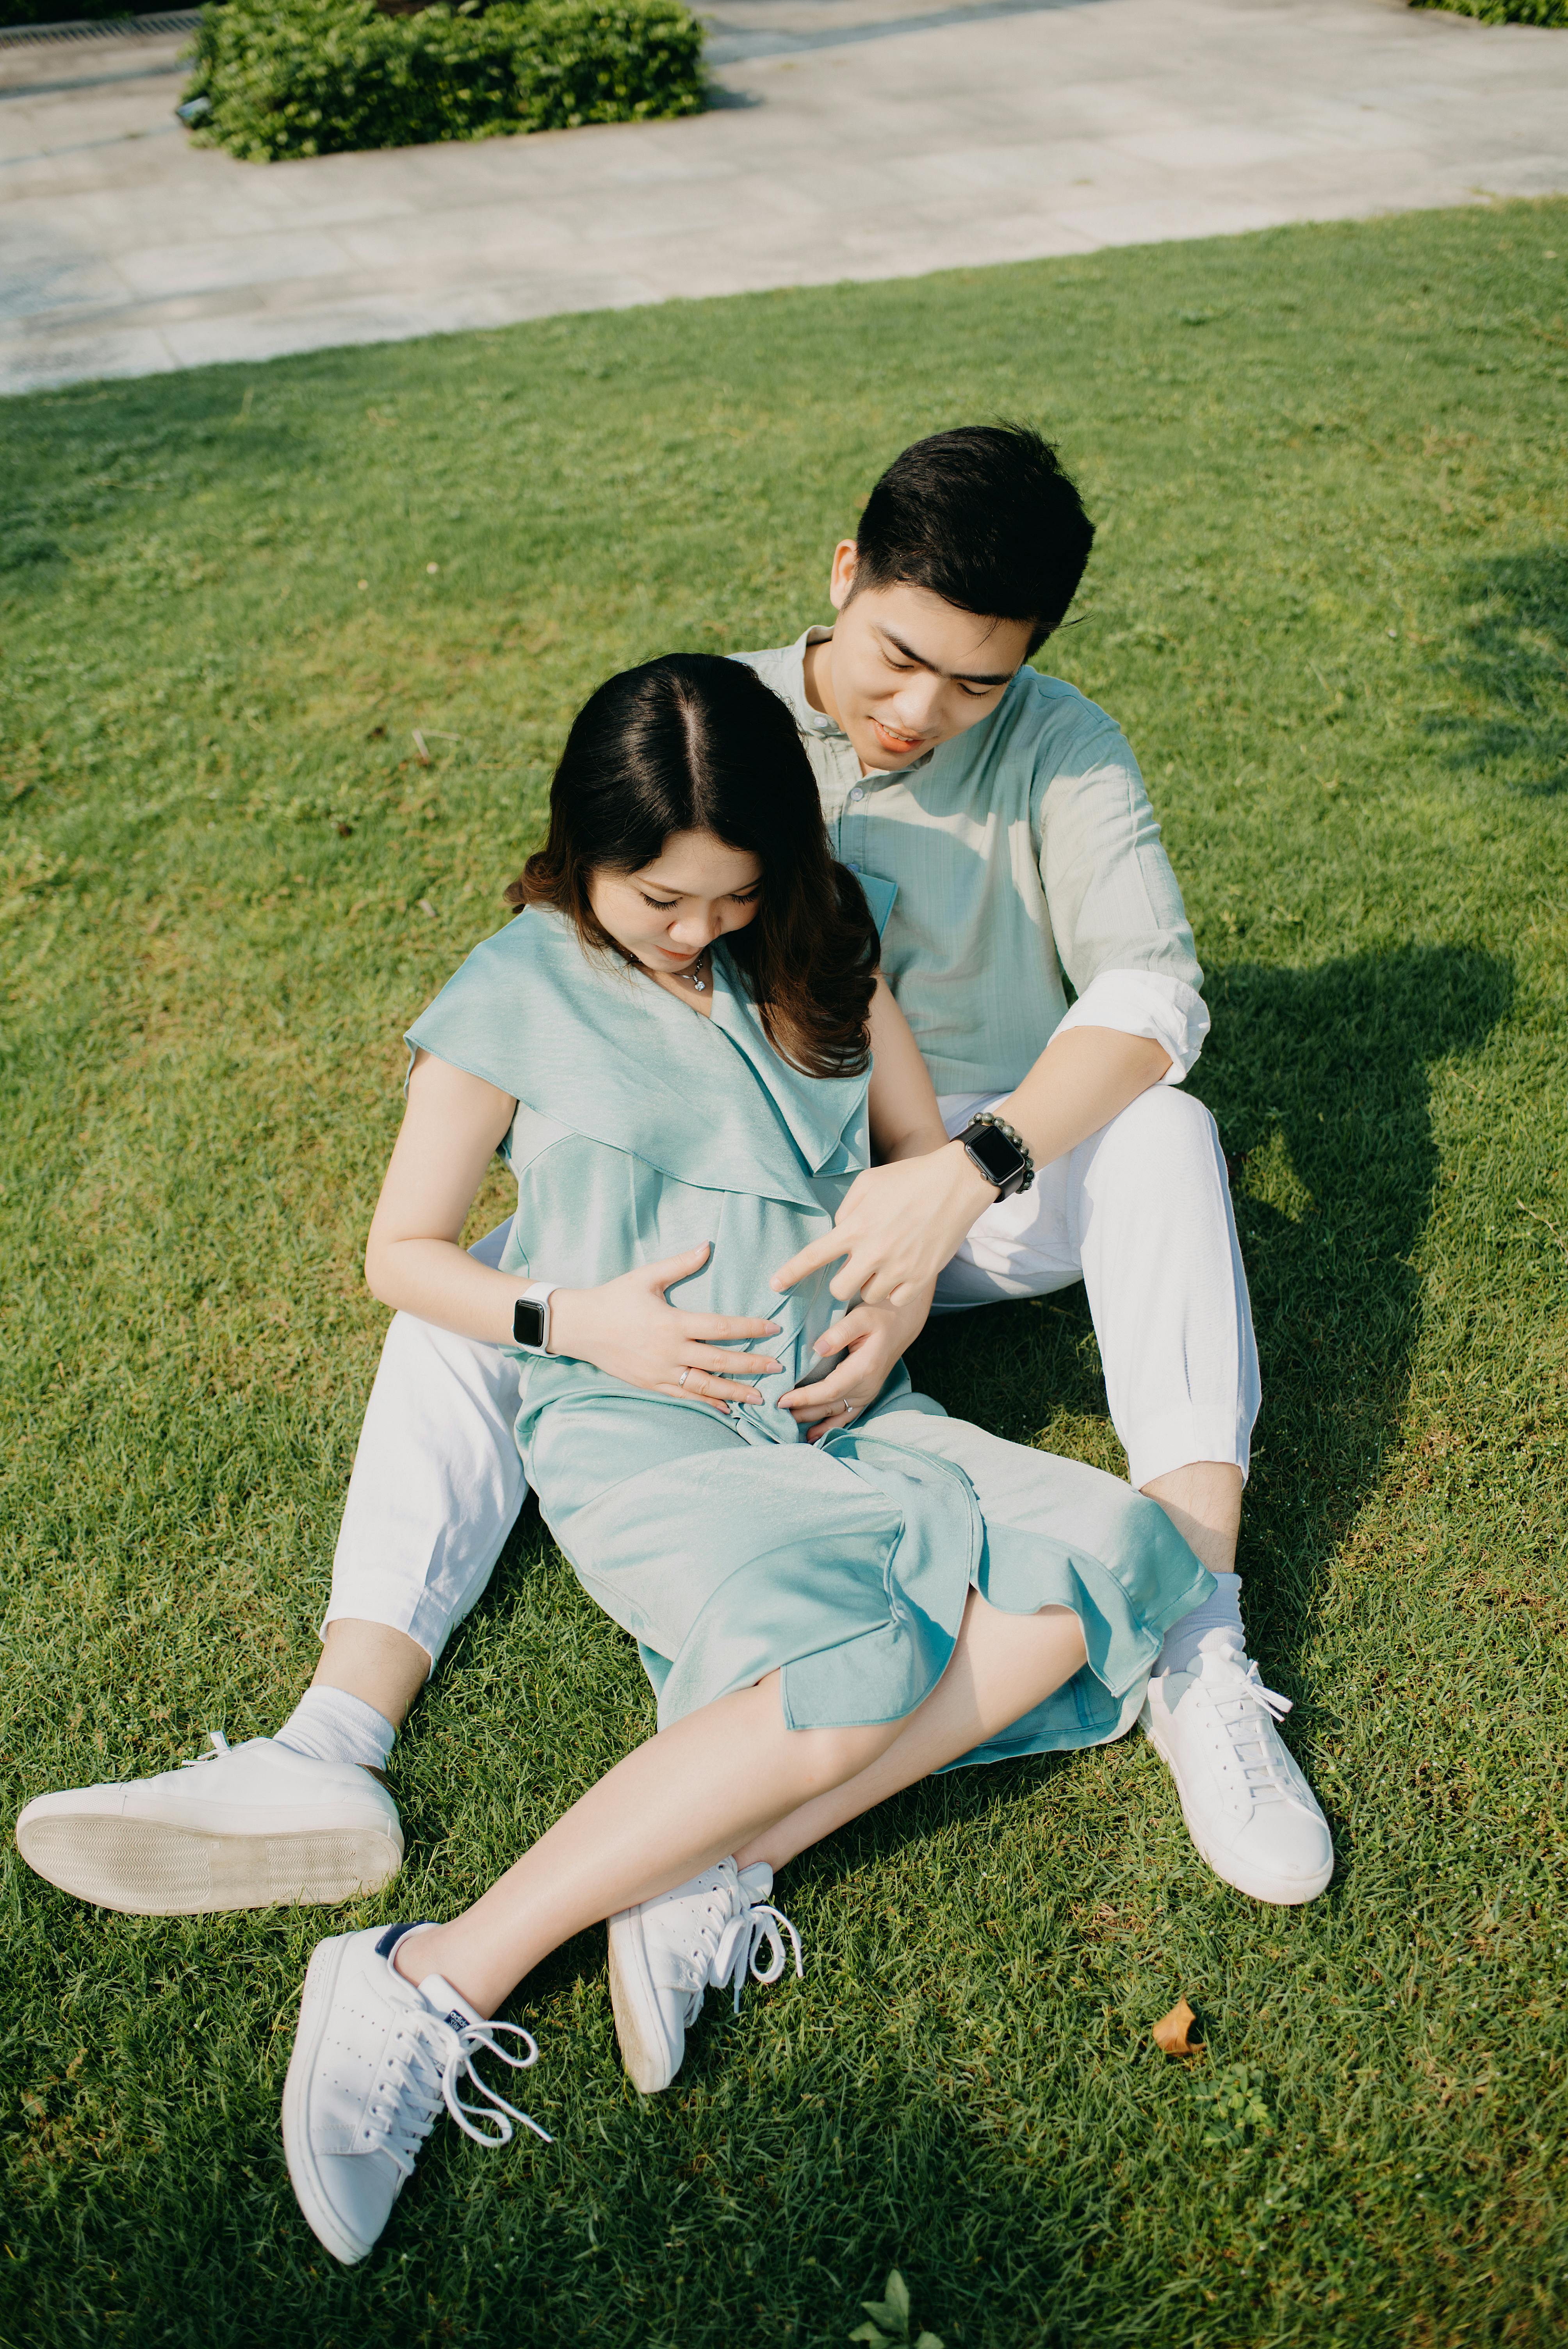 A couple resting on green lawn | Source: Pexels